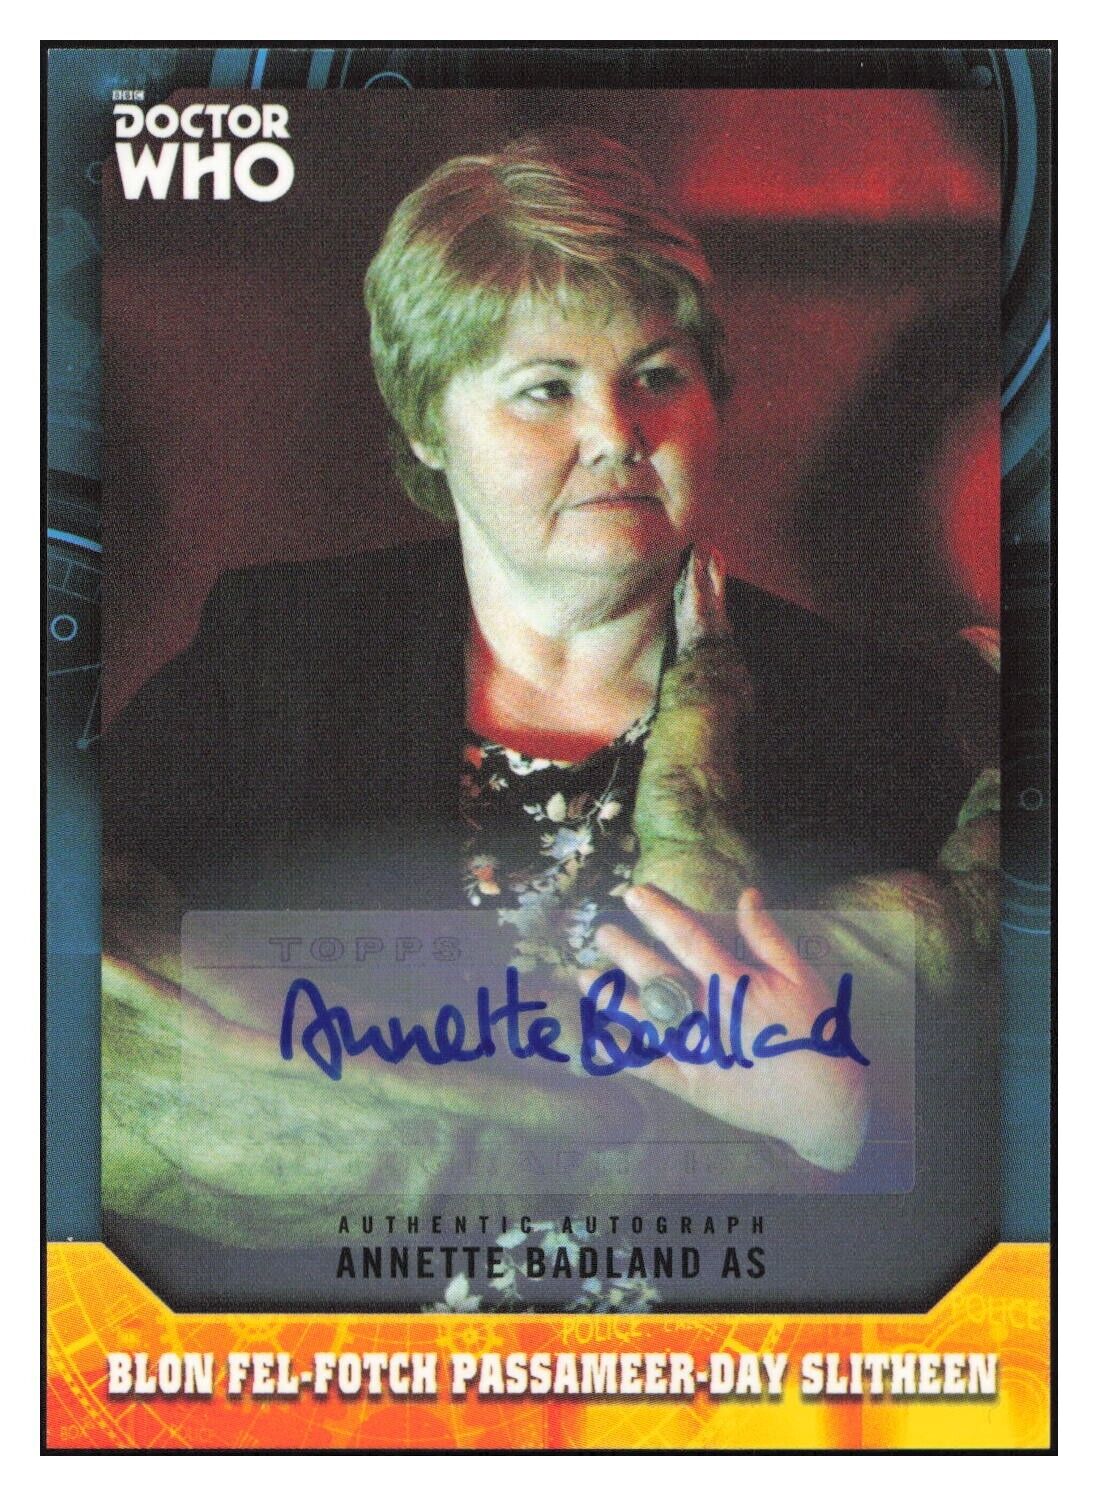 2016 Topps Doctor Who Signature Series Annette Badland Auto #33